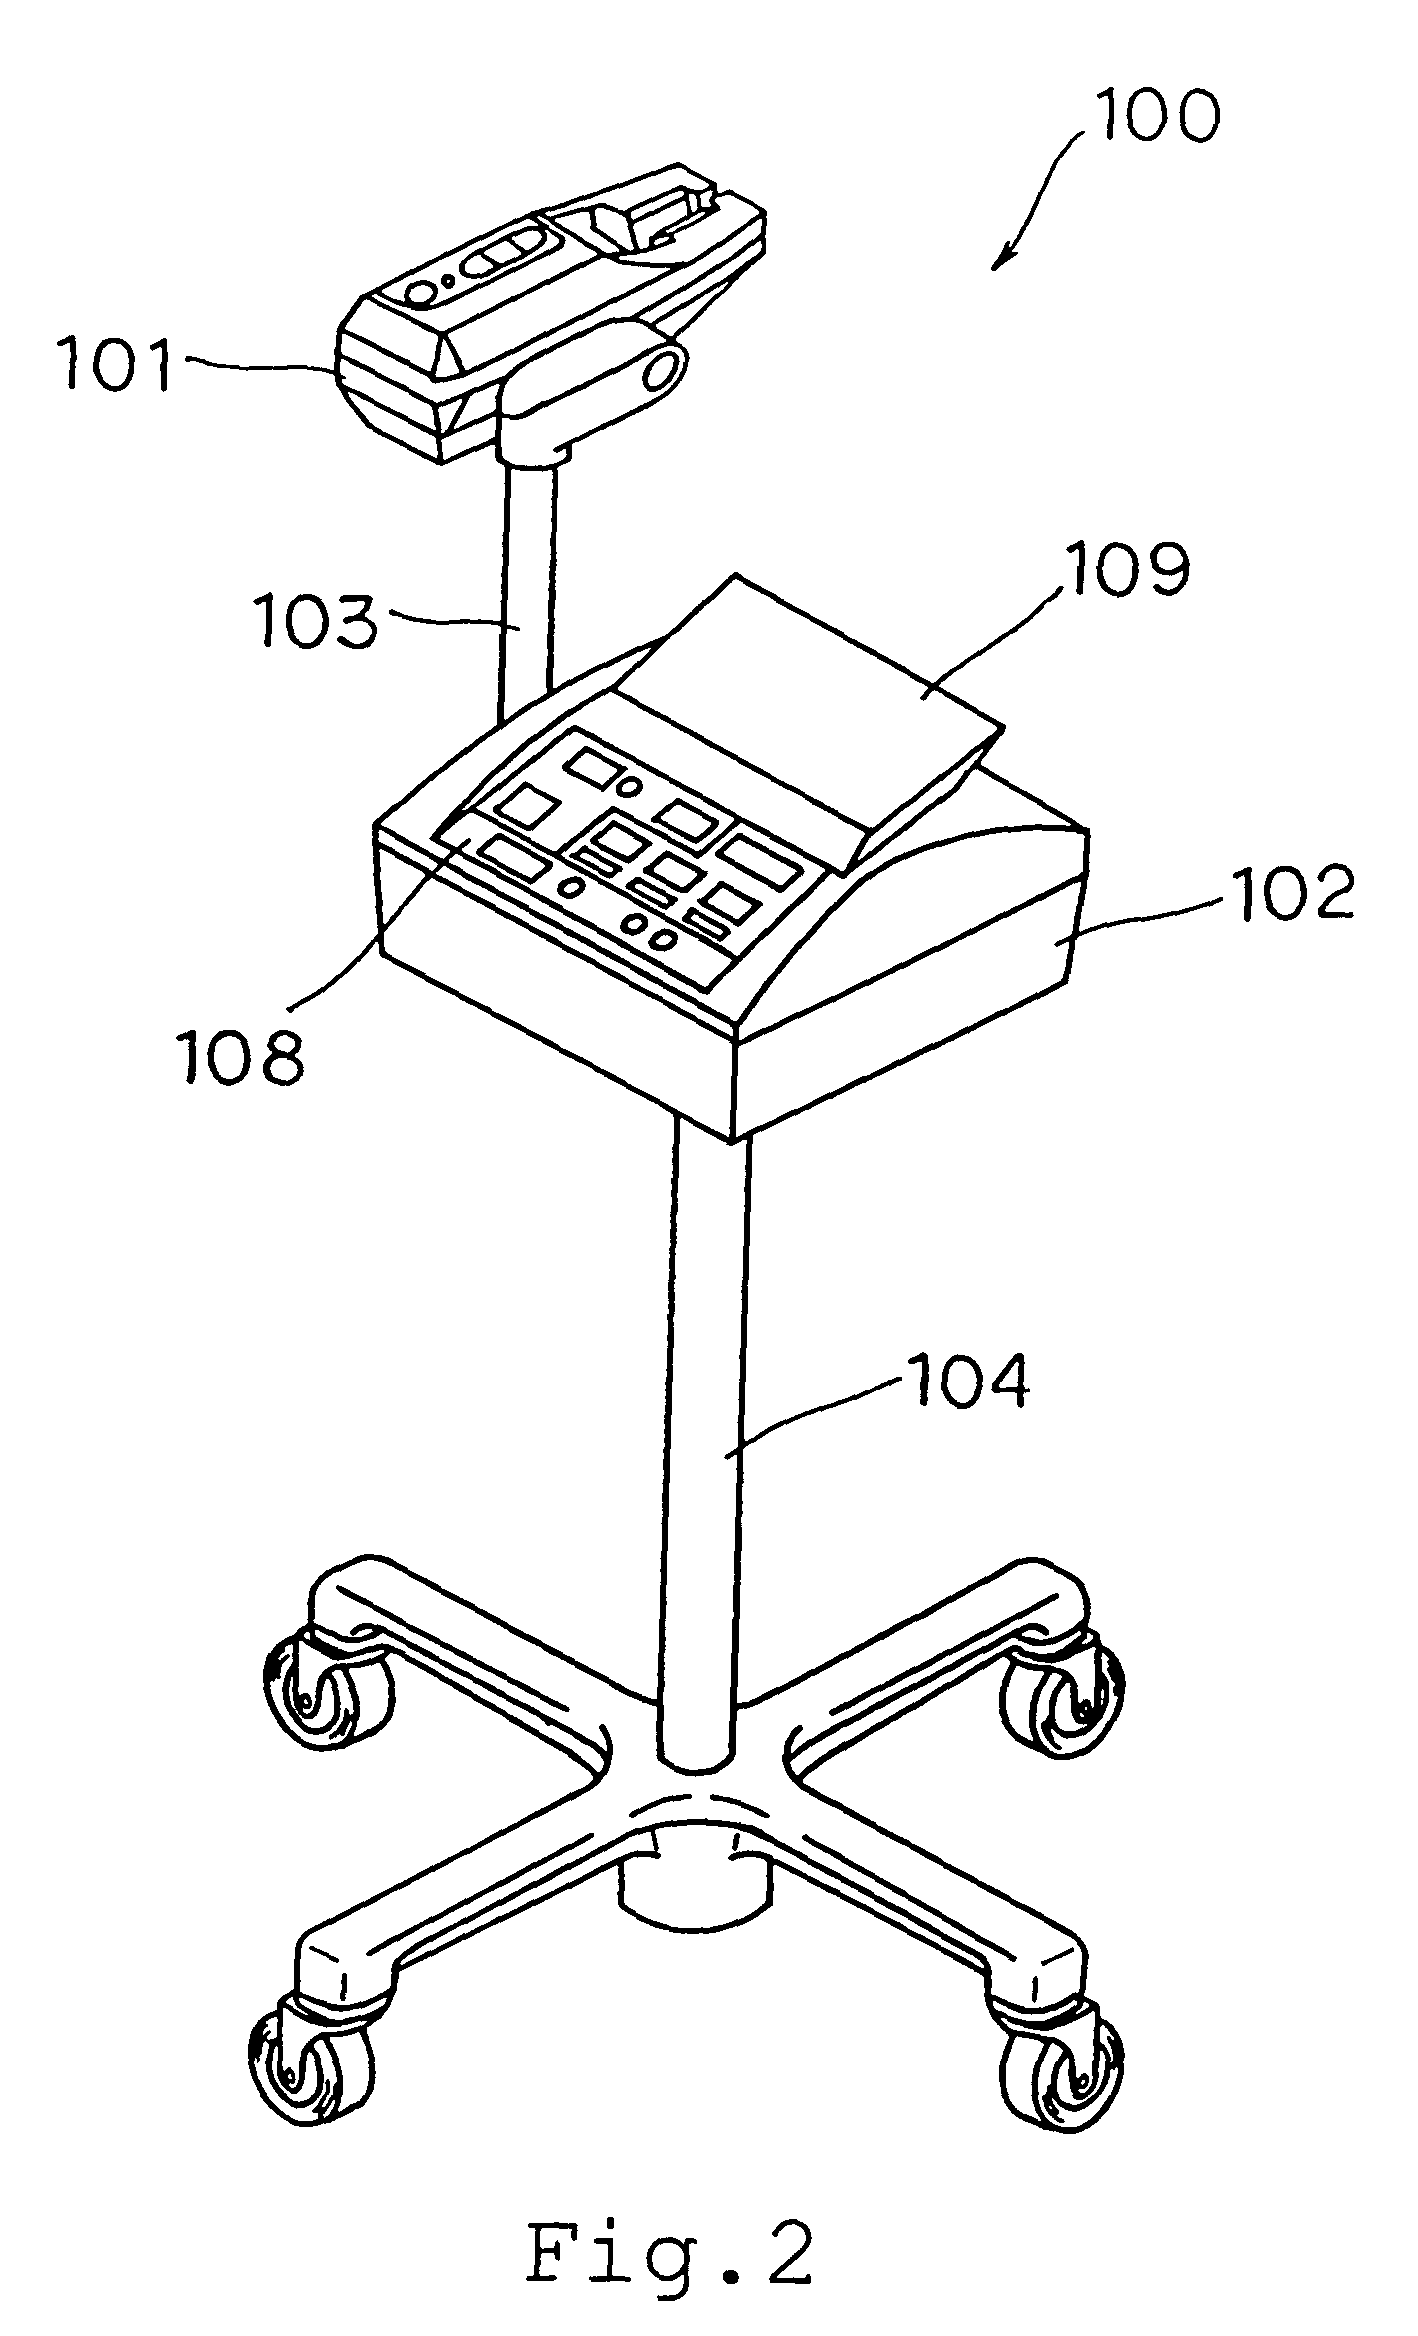 Liquid injector for injecting contrast medium at variable rate into a subject who is to be imaged by imaging diagnostic apparatus